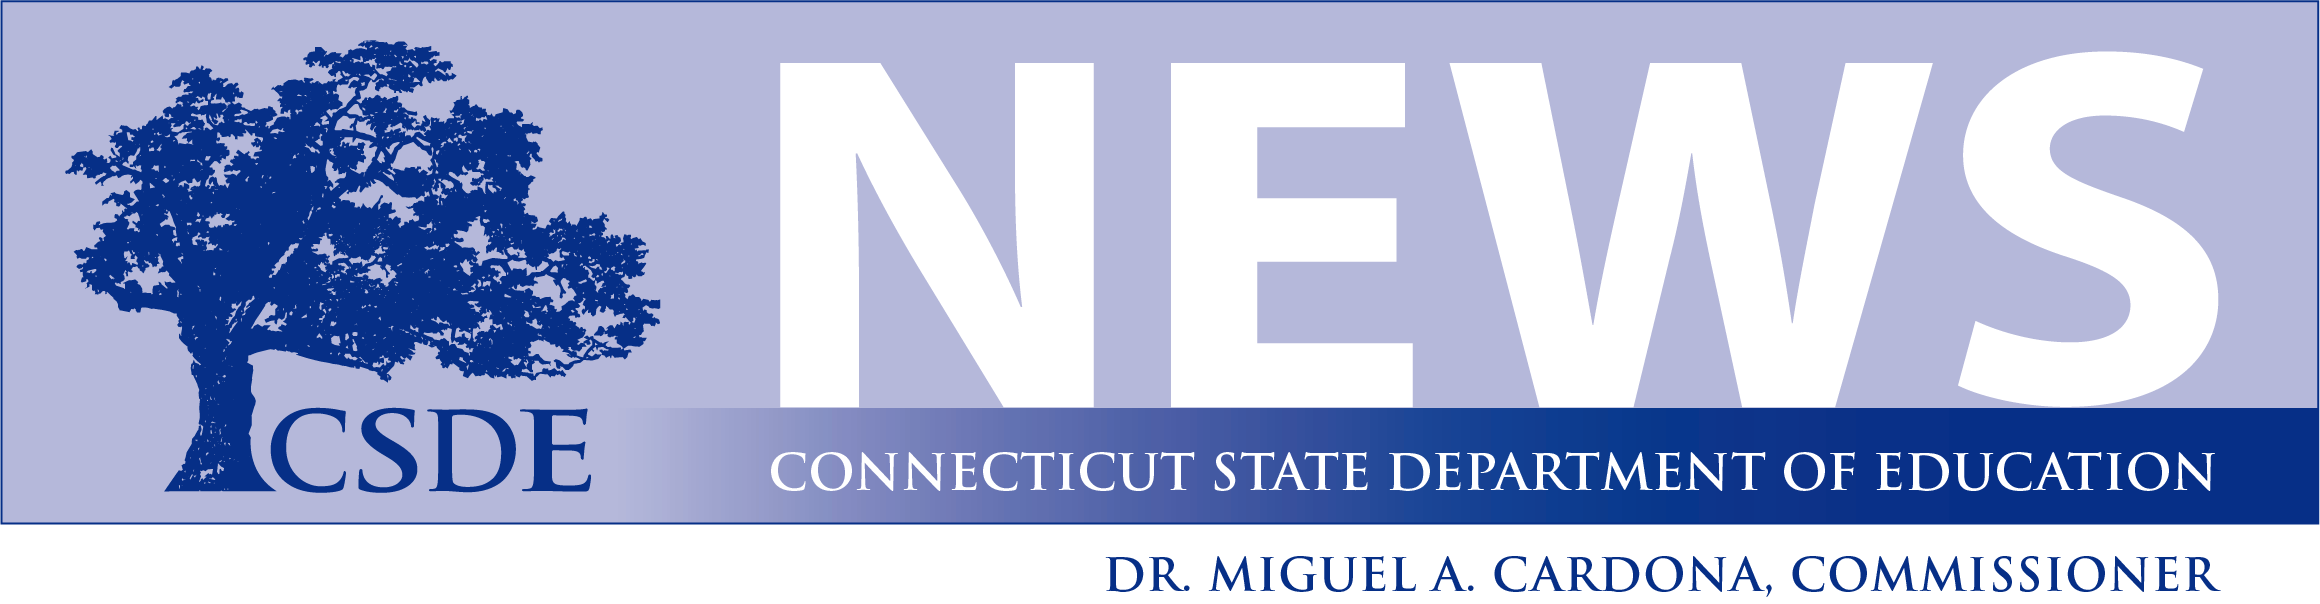 Connecticut State Department of Education News